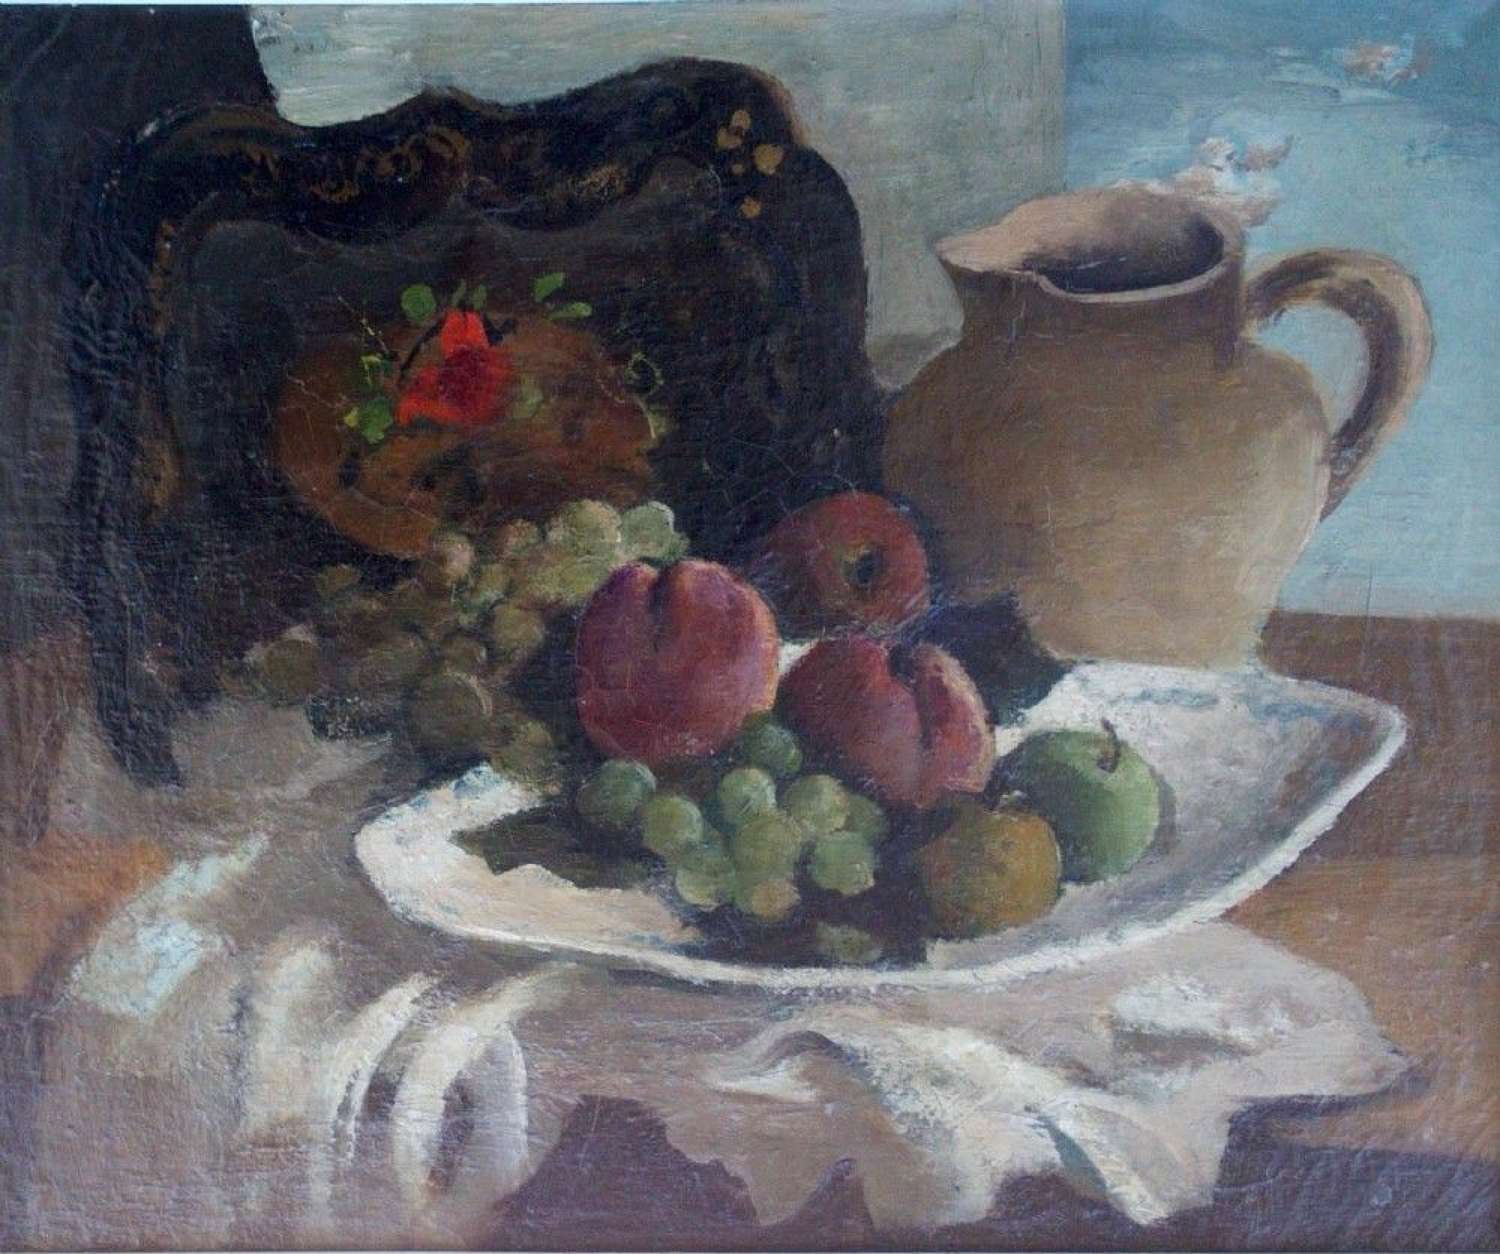 The Cloud Behind The Jug: Airy Mysterious French 1920s Still Life Oil